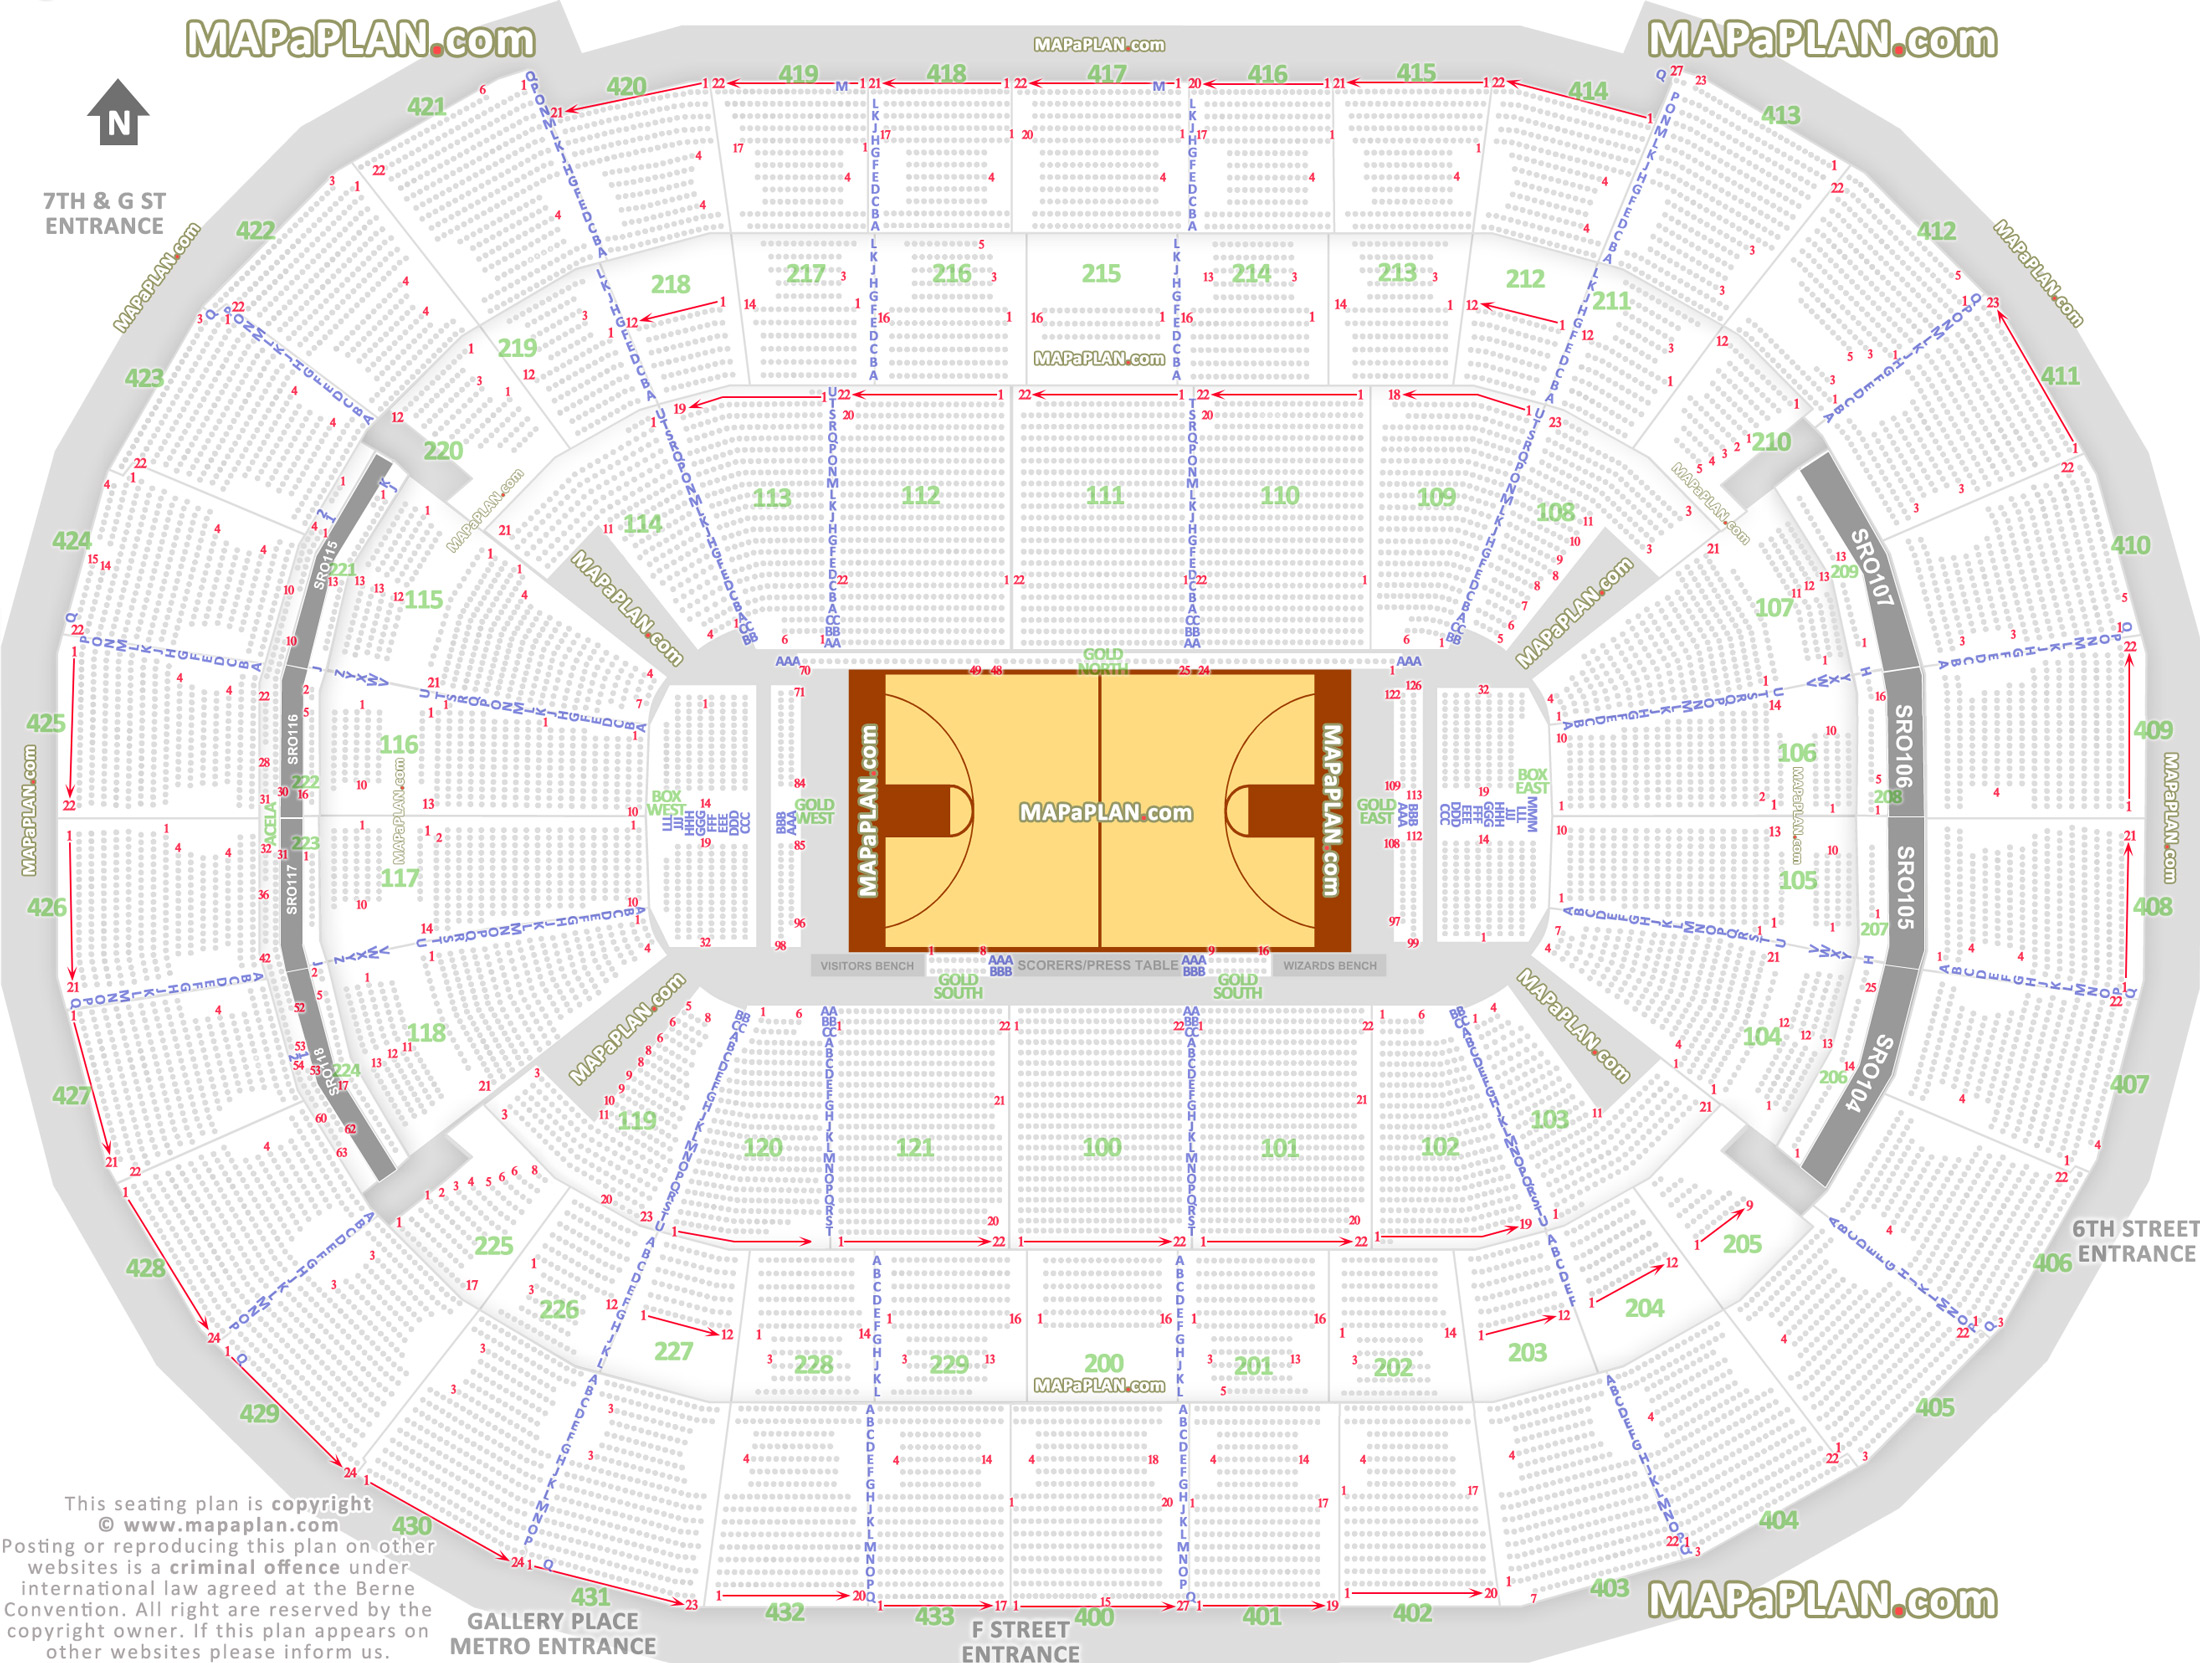 Wizards Seating Chart